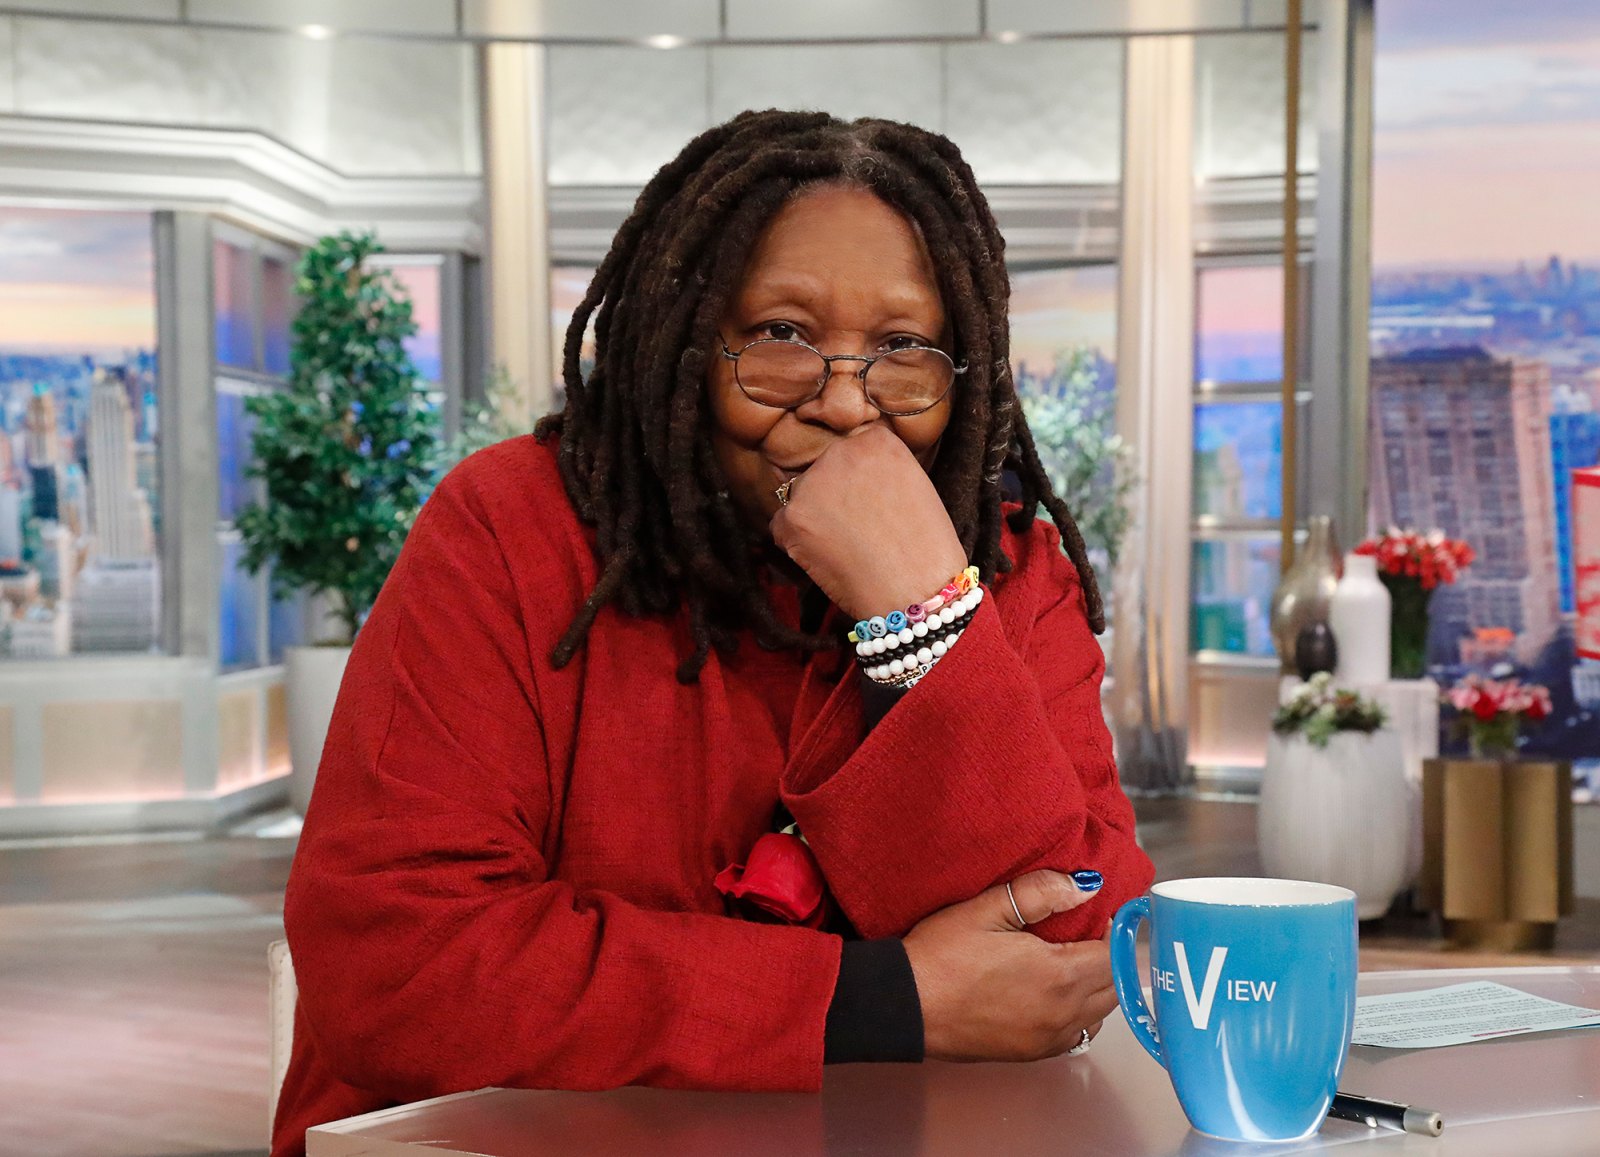 Whoopi Goldberg Apologizes After Saying Romani Slur on 'The View': 'I Shouldn’t Have' Used Certain Words